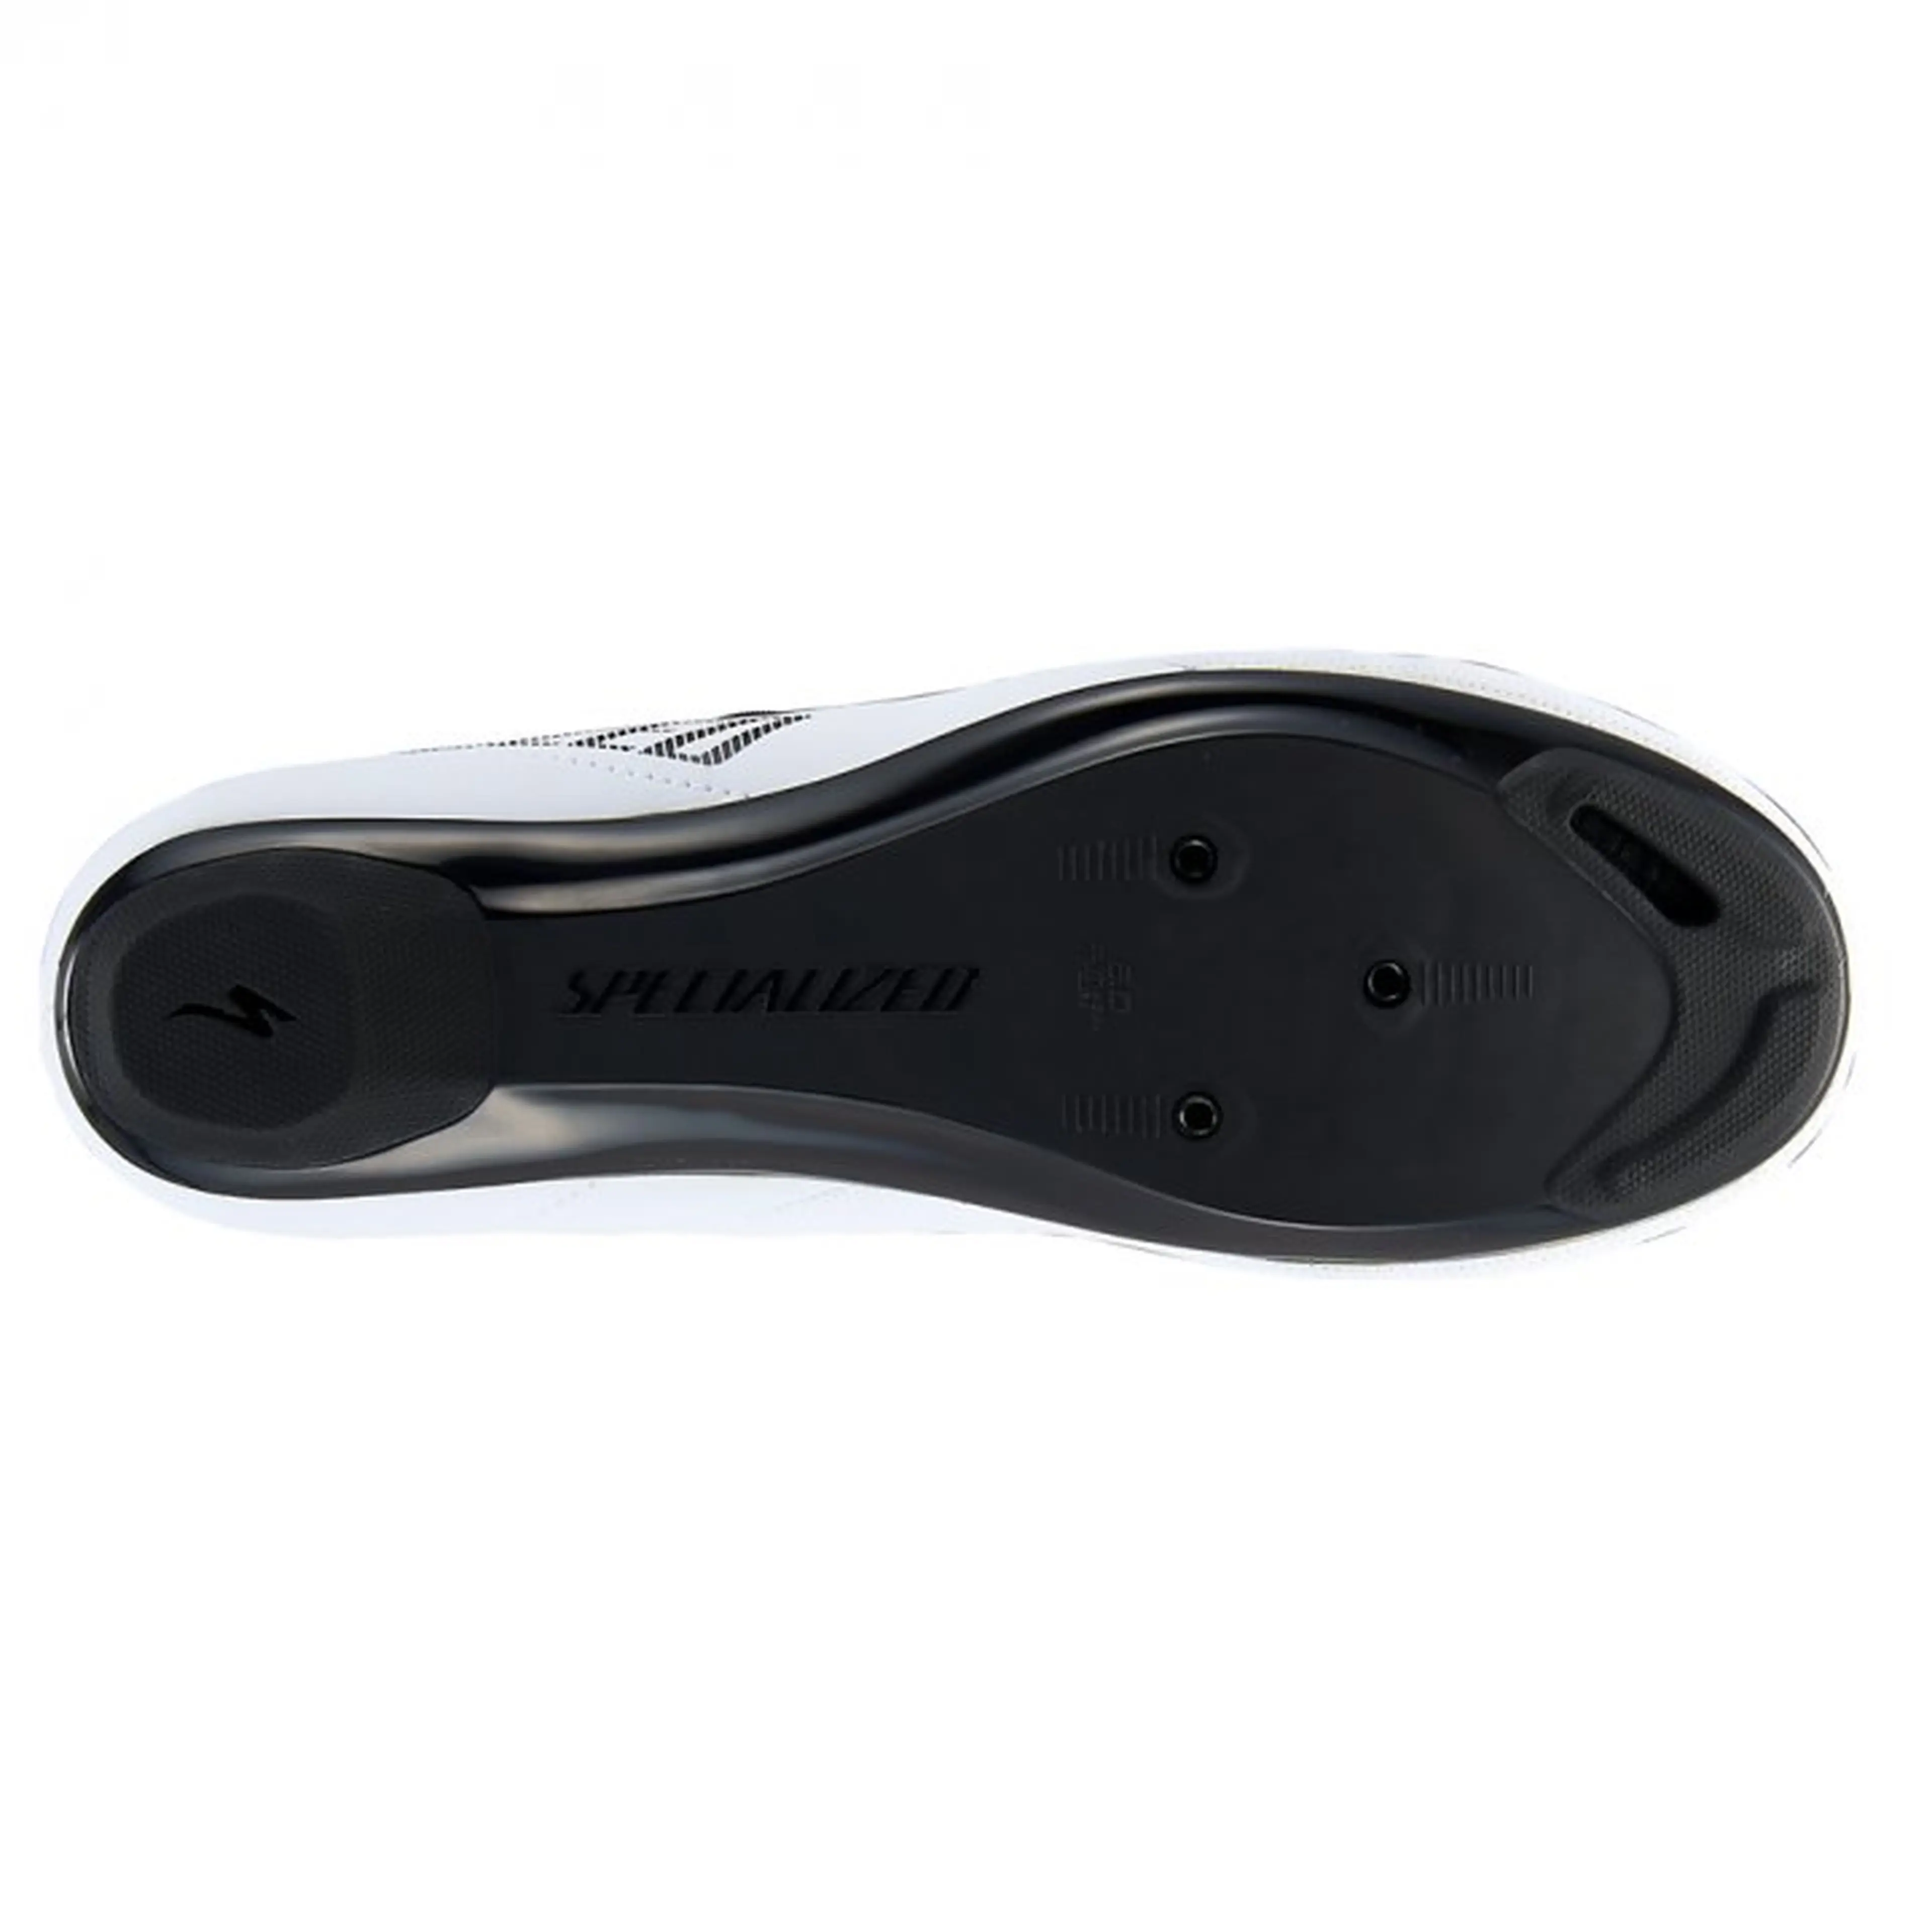 3. Pantofi ciclism Specialized Torch 1.0 Road